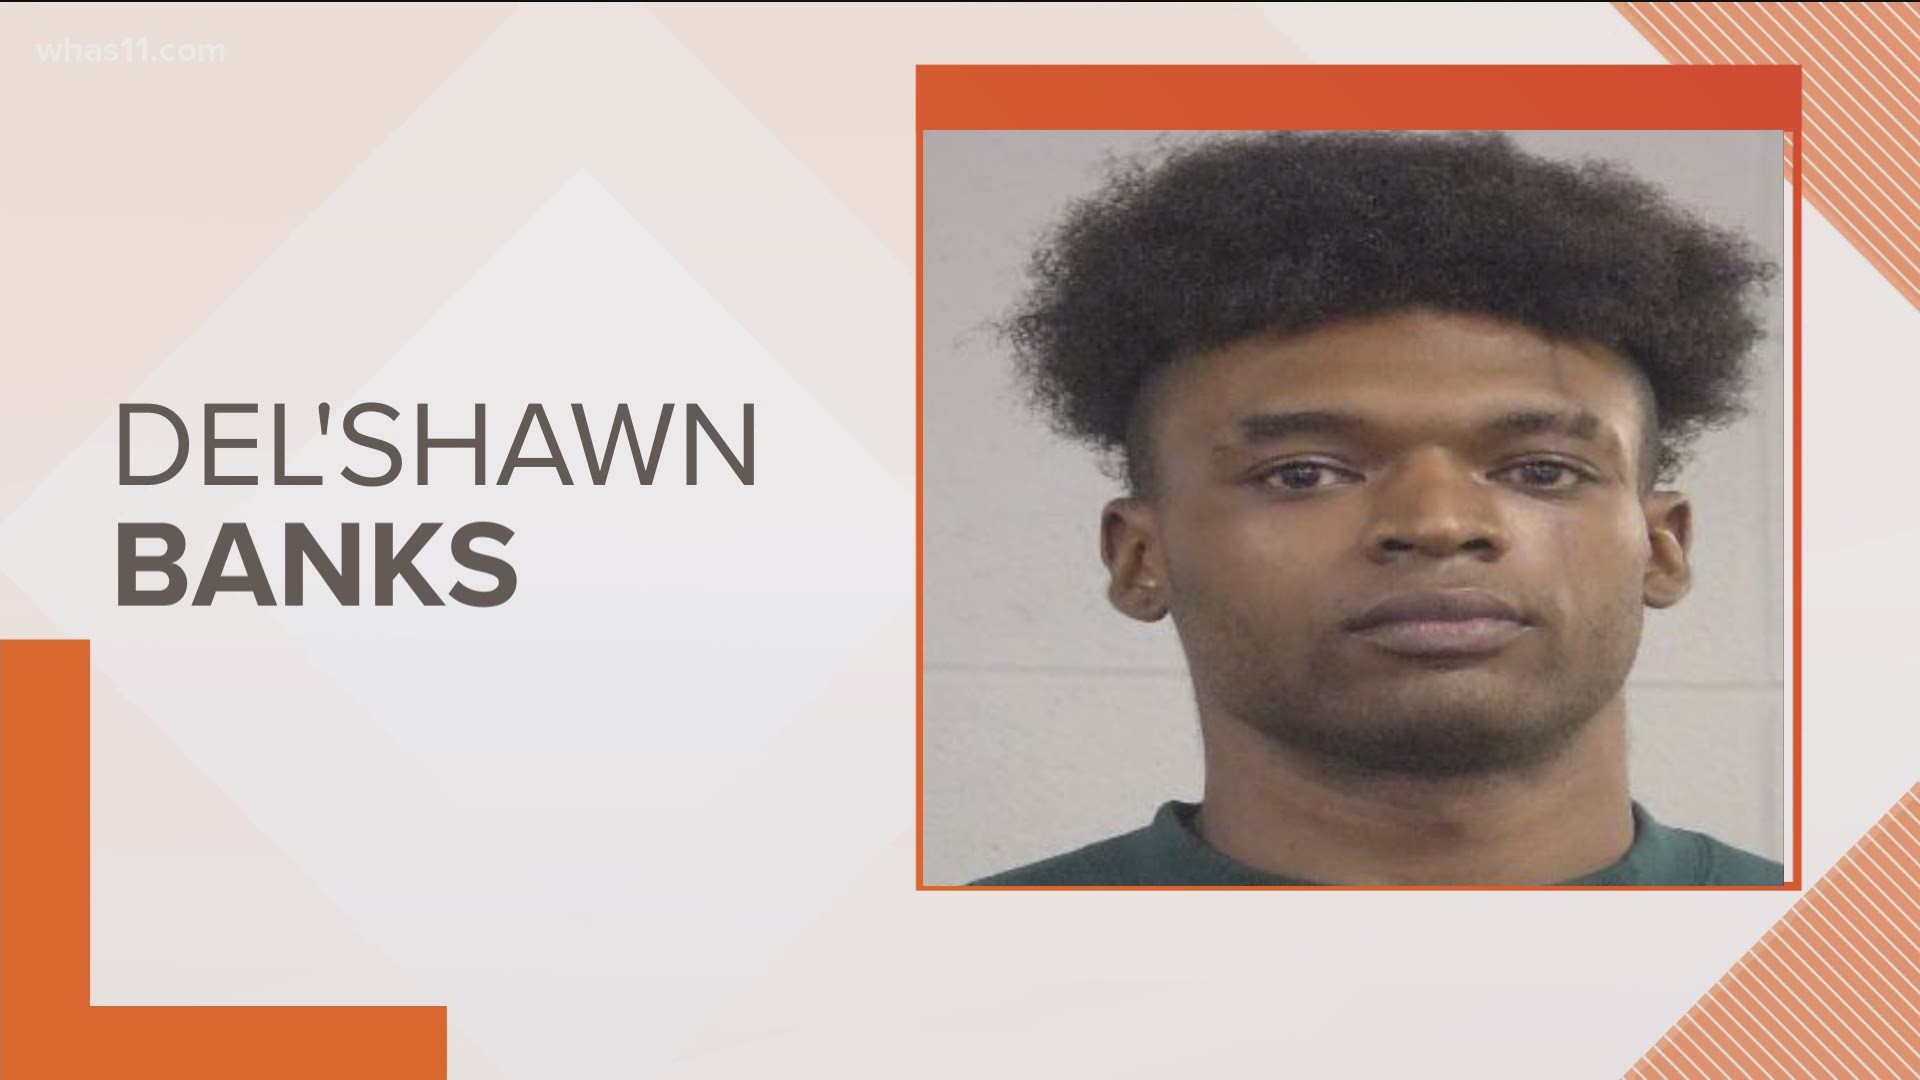 Del'Shawn Banks was arrested for murder and domestic violence after admitting he shook and threw his infant daughter to the ground.